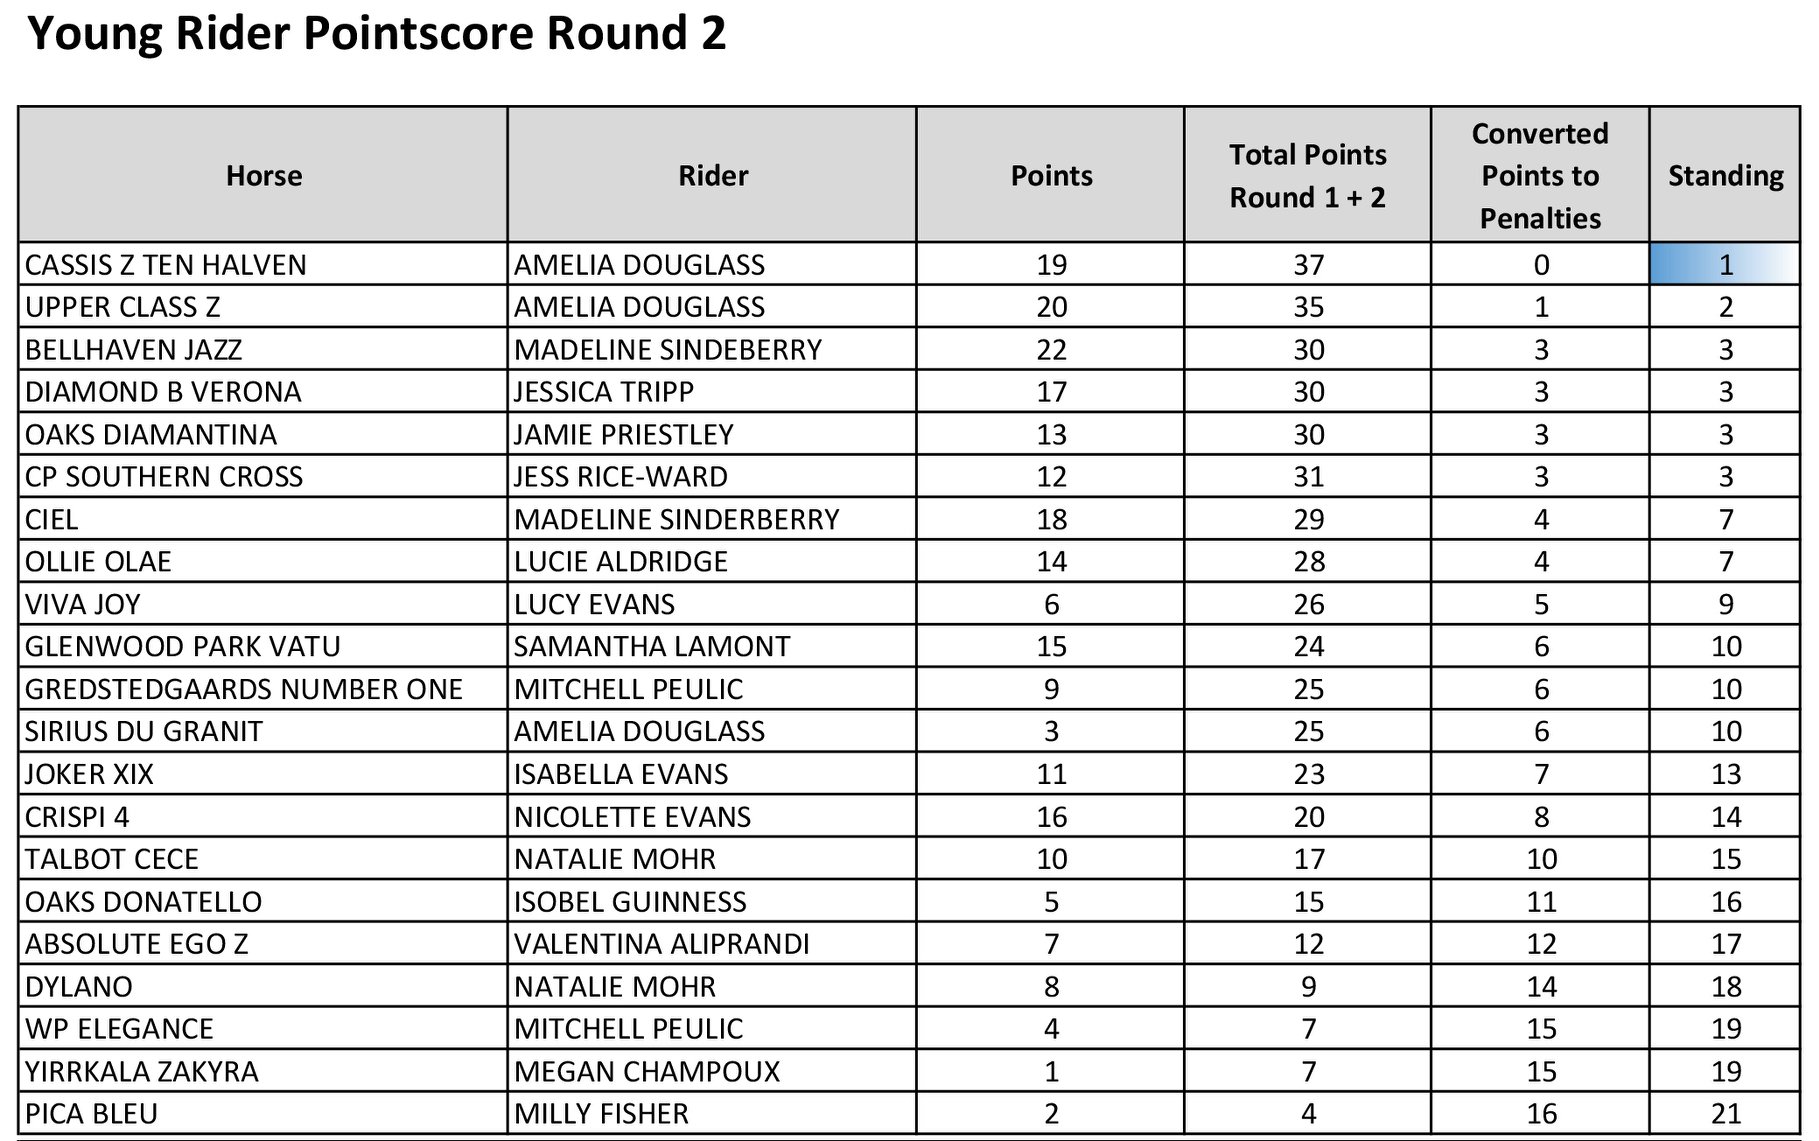 Young Rider Pointscore Round 2